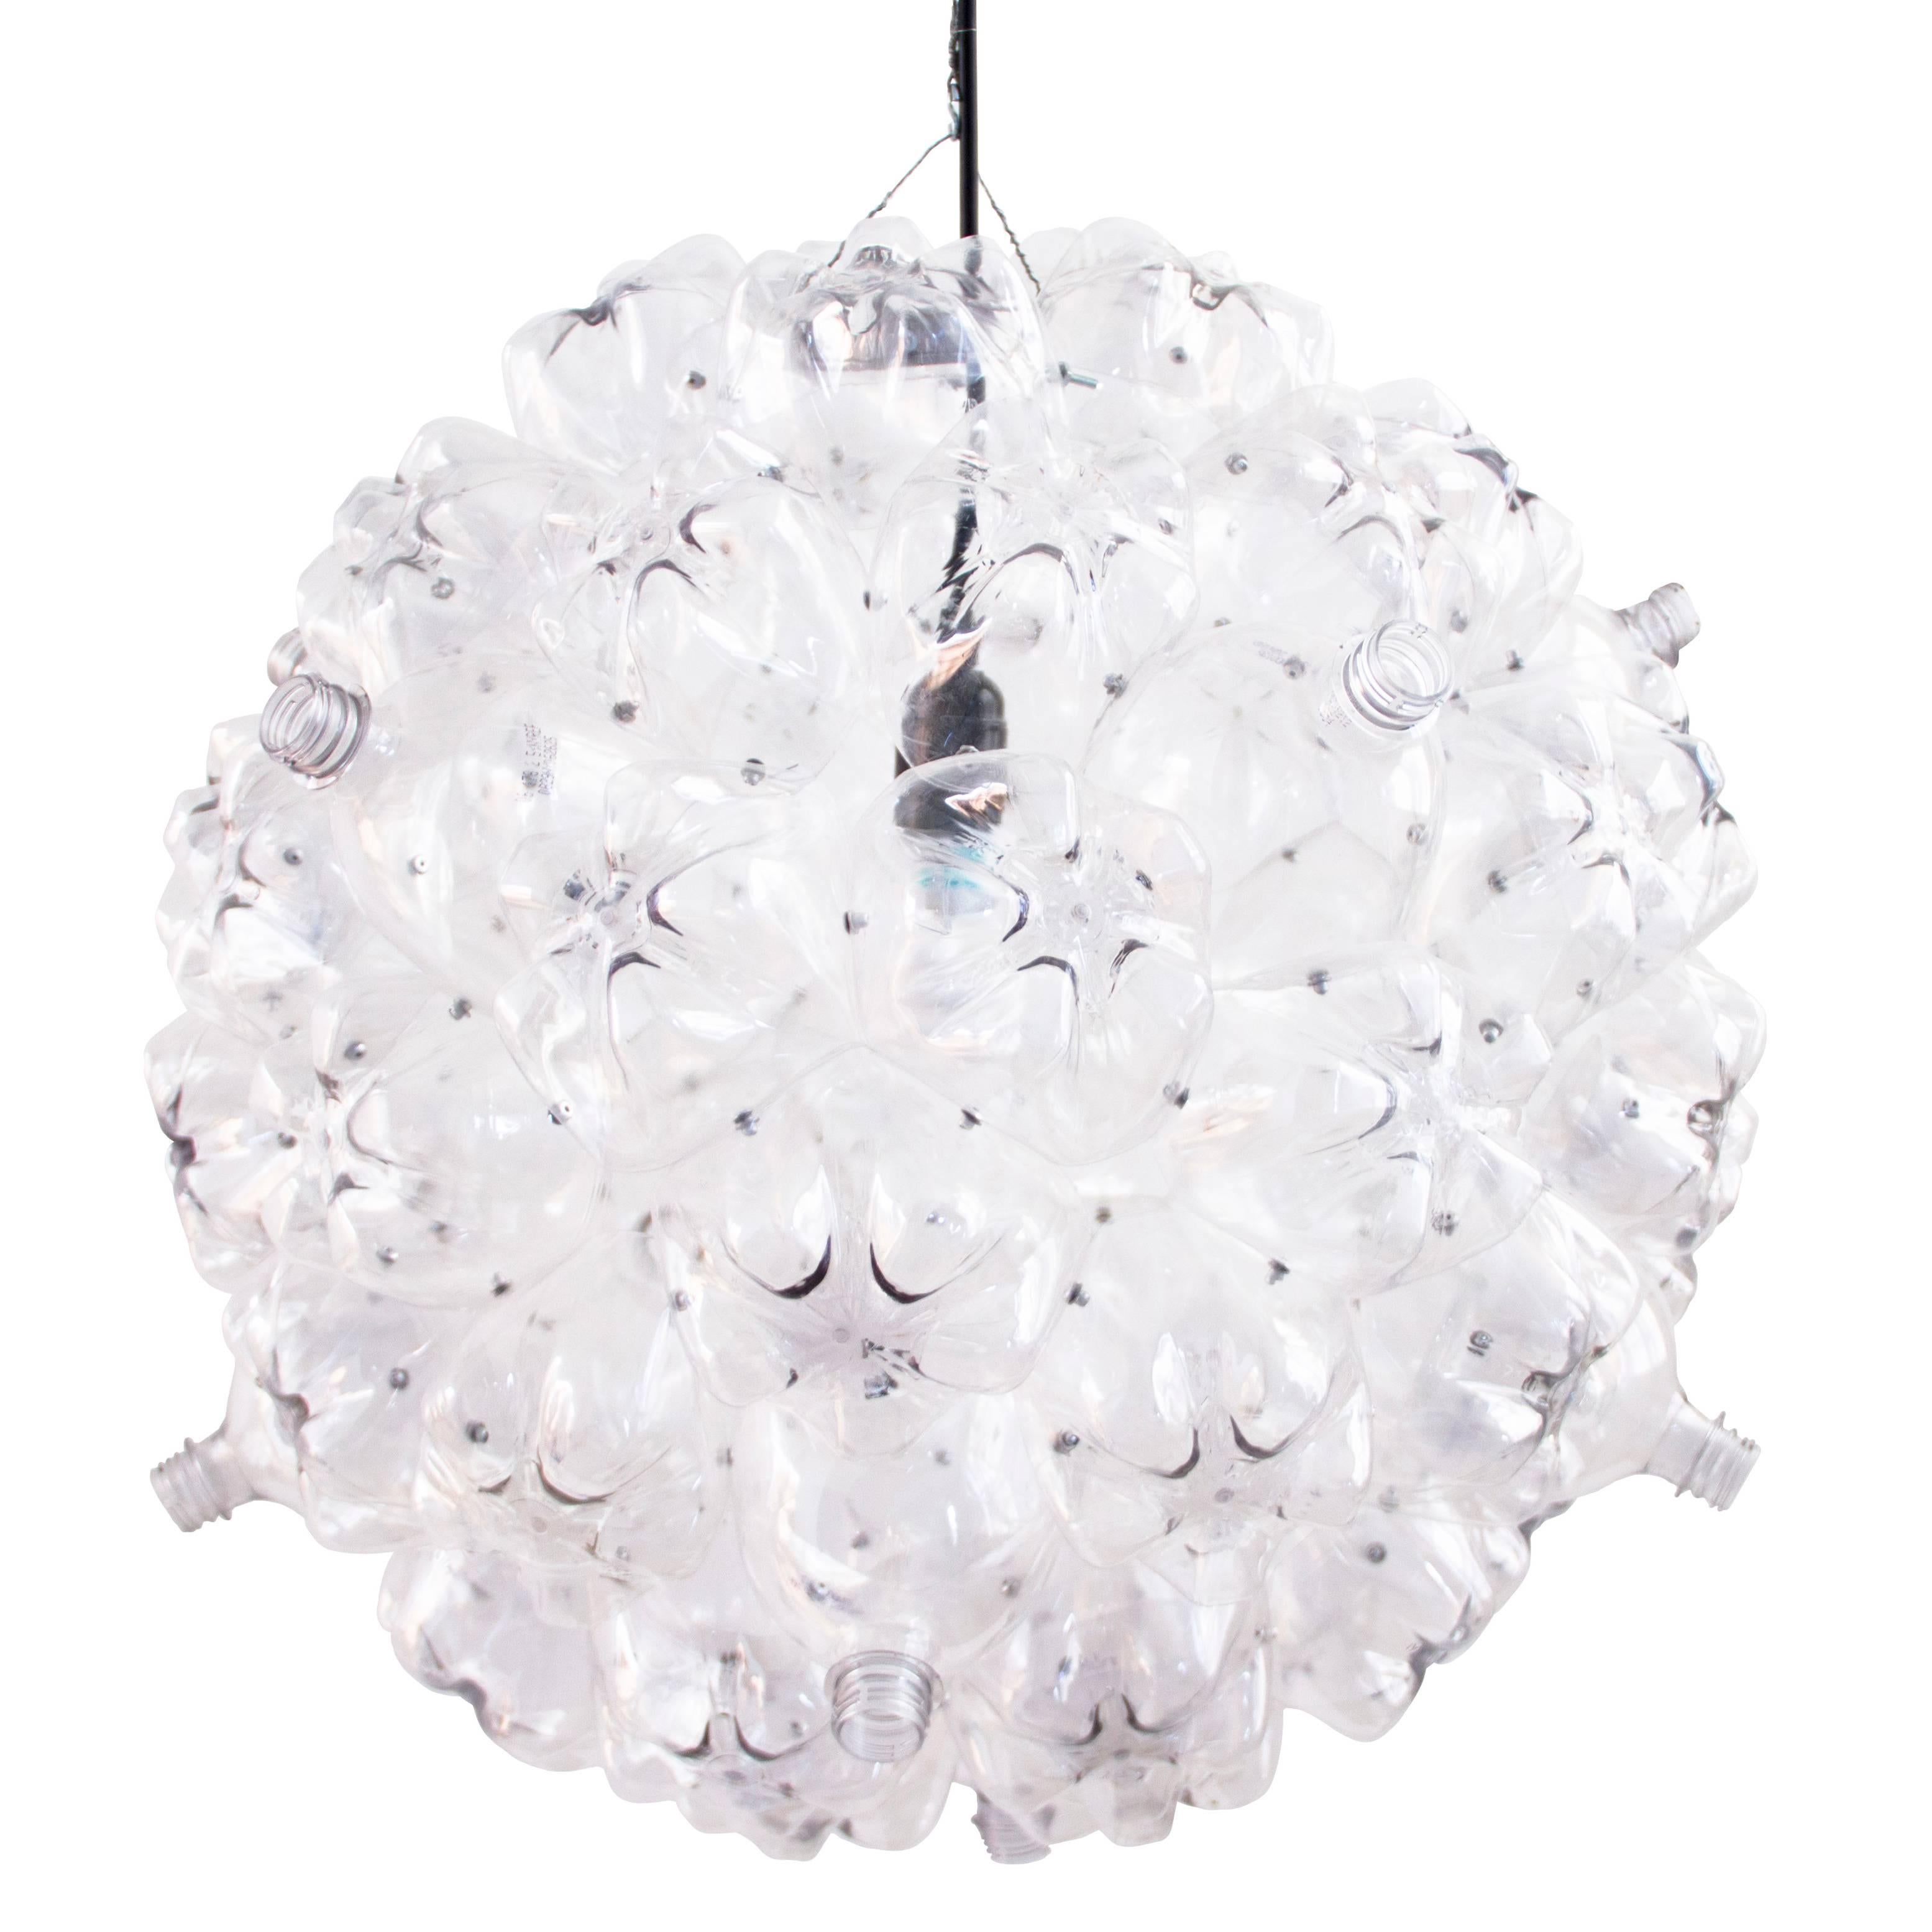 Originally inspired by the cell-like shape of soap bubbles, the bubble chandelier is made from post-consumer PET bottles that have been cleaned, cut, and riveted together. The entirety of the plastic bottles used to create the Bubble Chandelier are